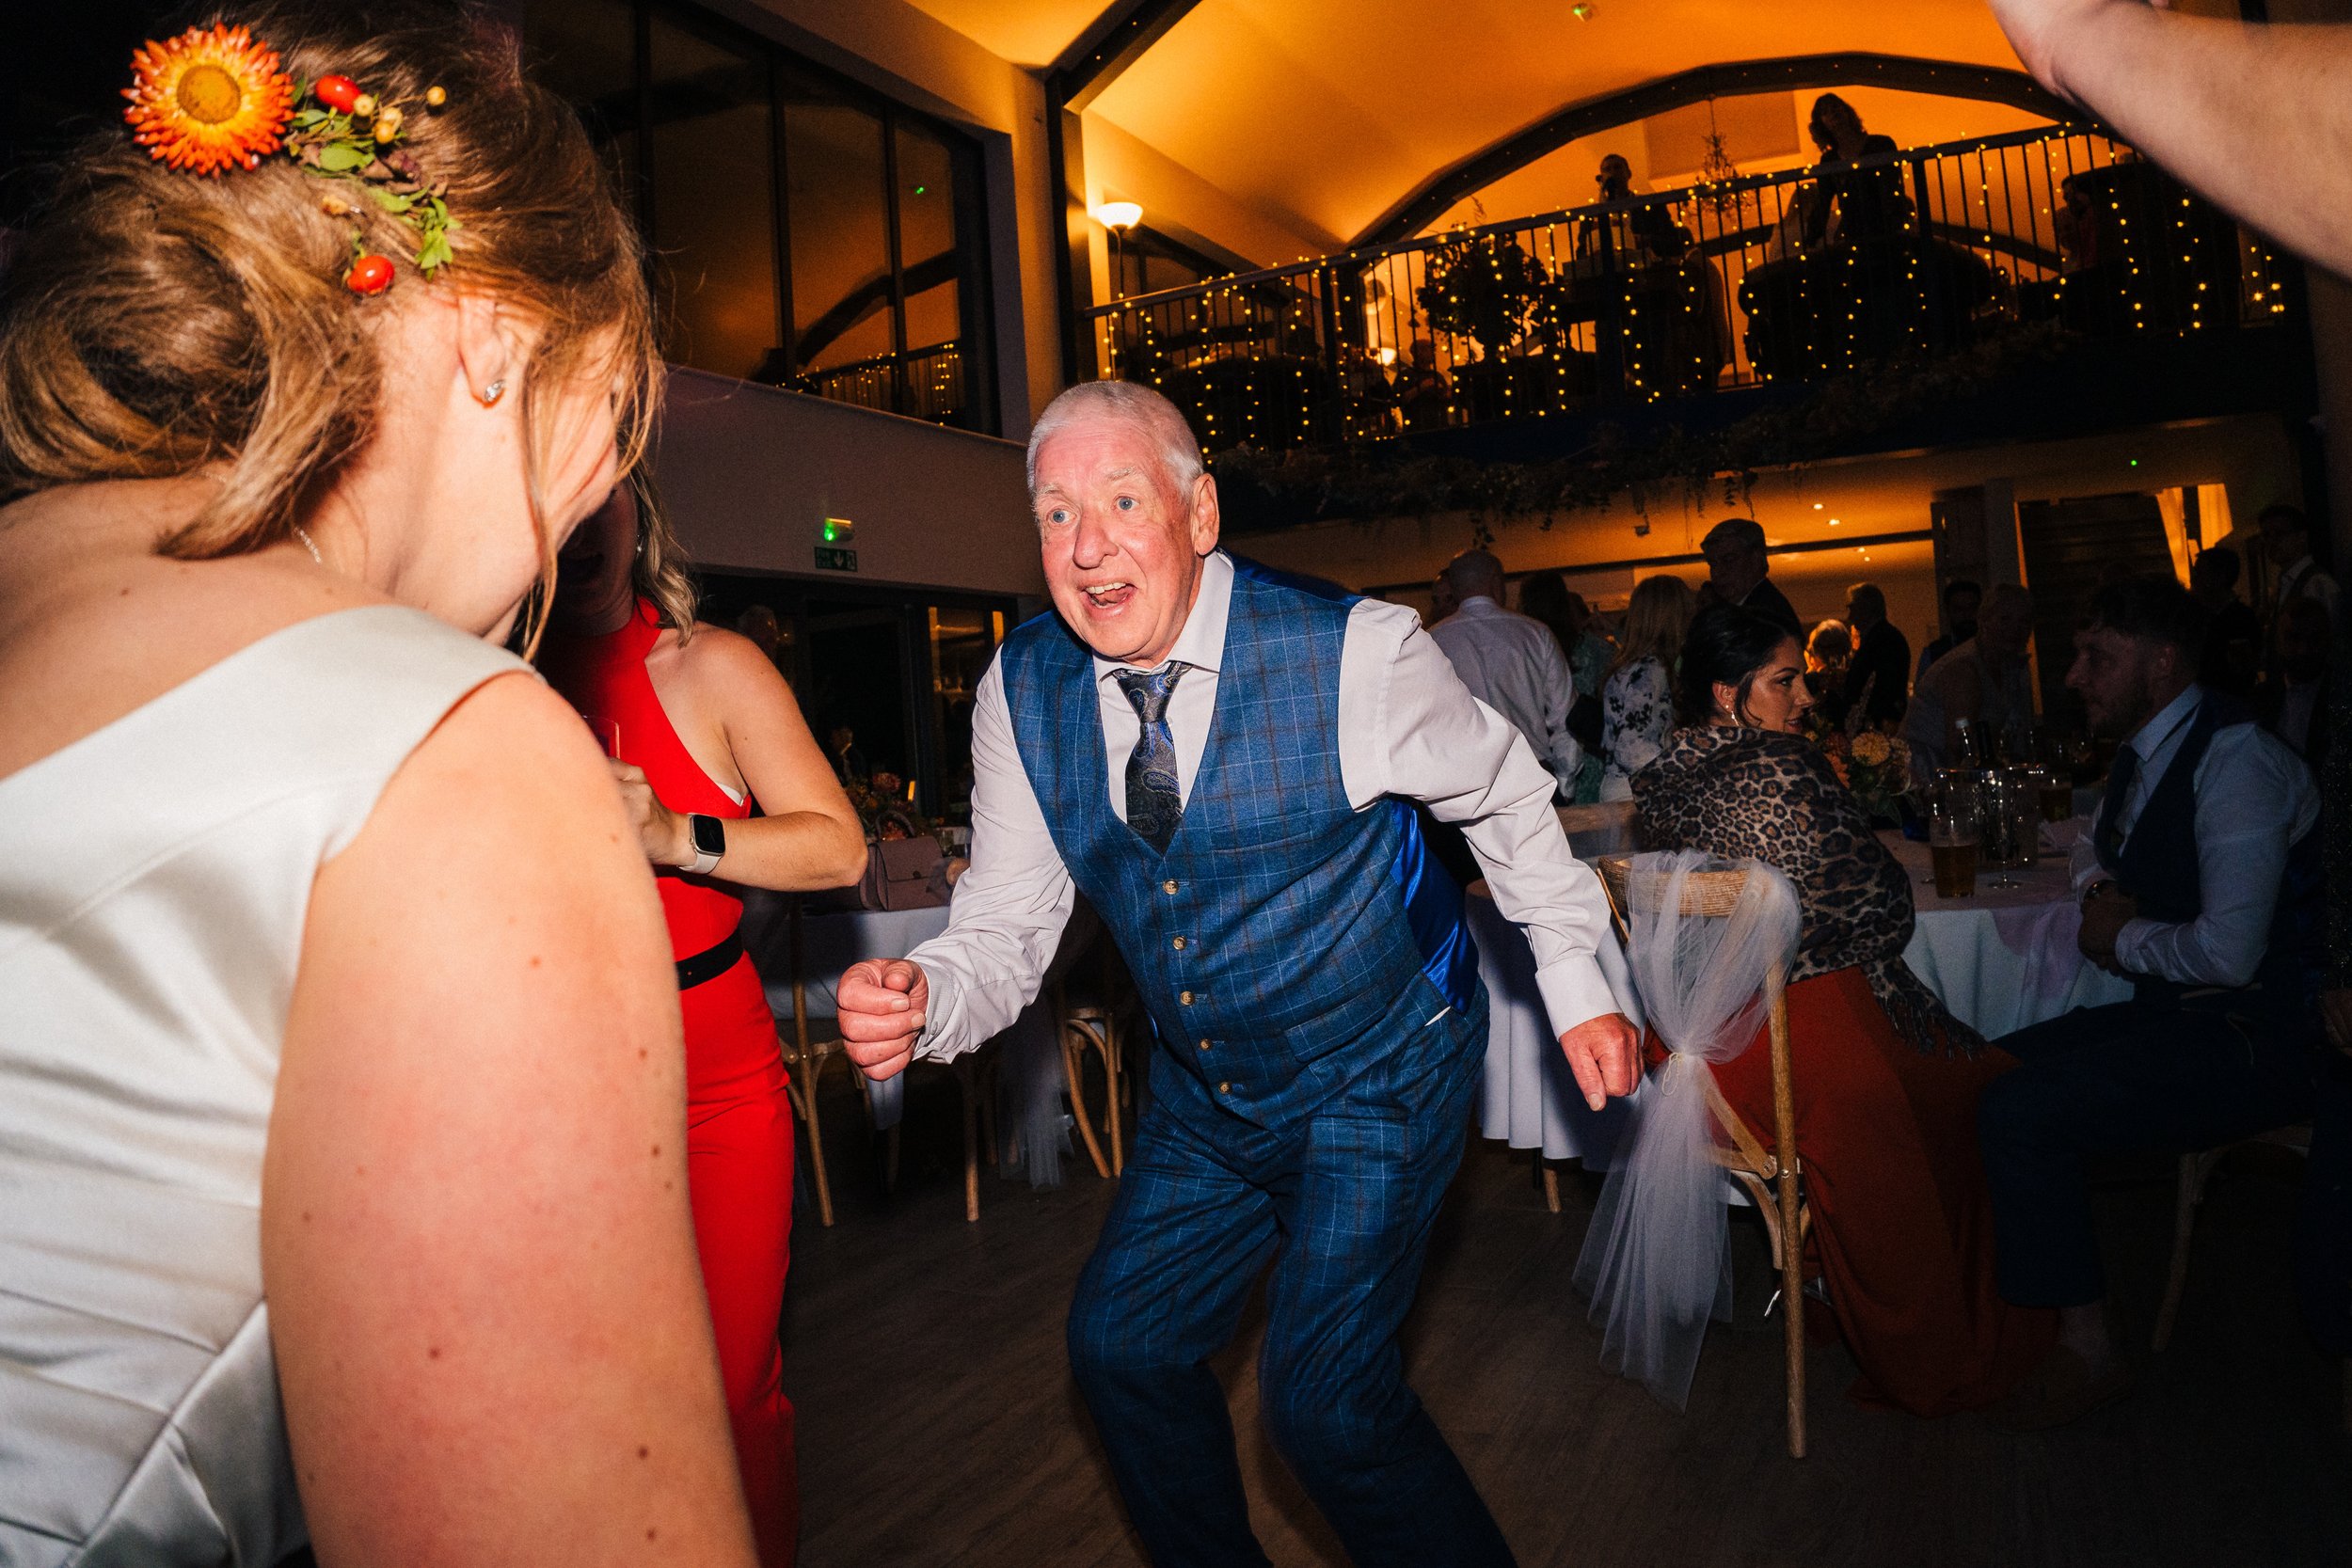 Oddhouse Farm Wedding Photography - father of the groom is up and dancing on the dancefloor at odd house farm